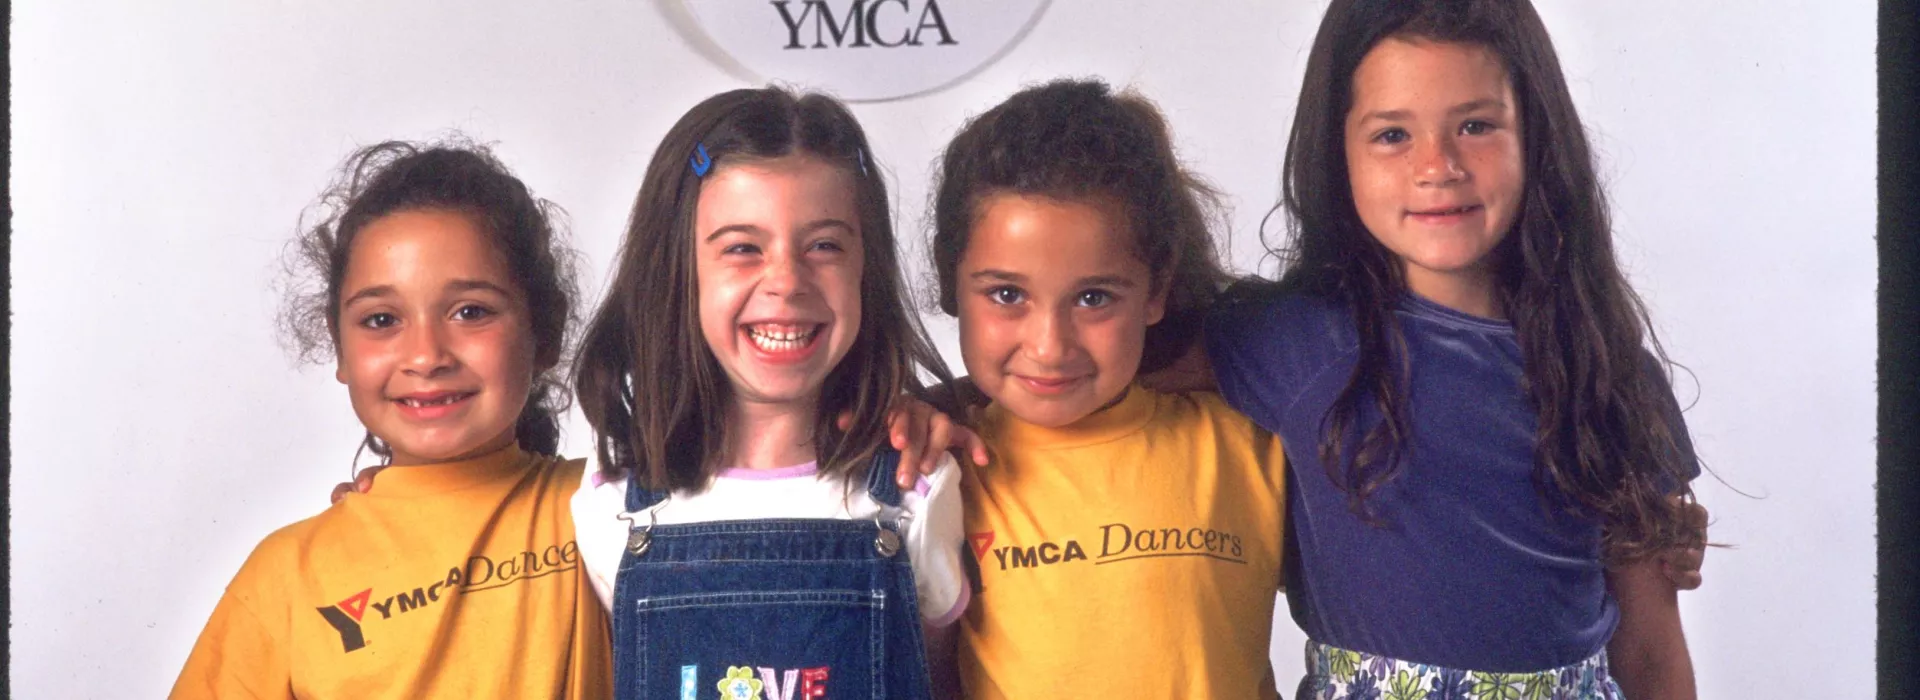 Four girls posed under an old YMCA logo.